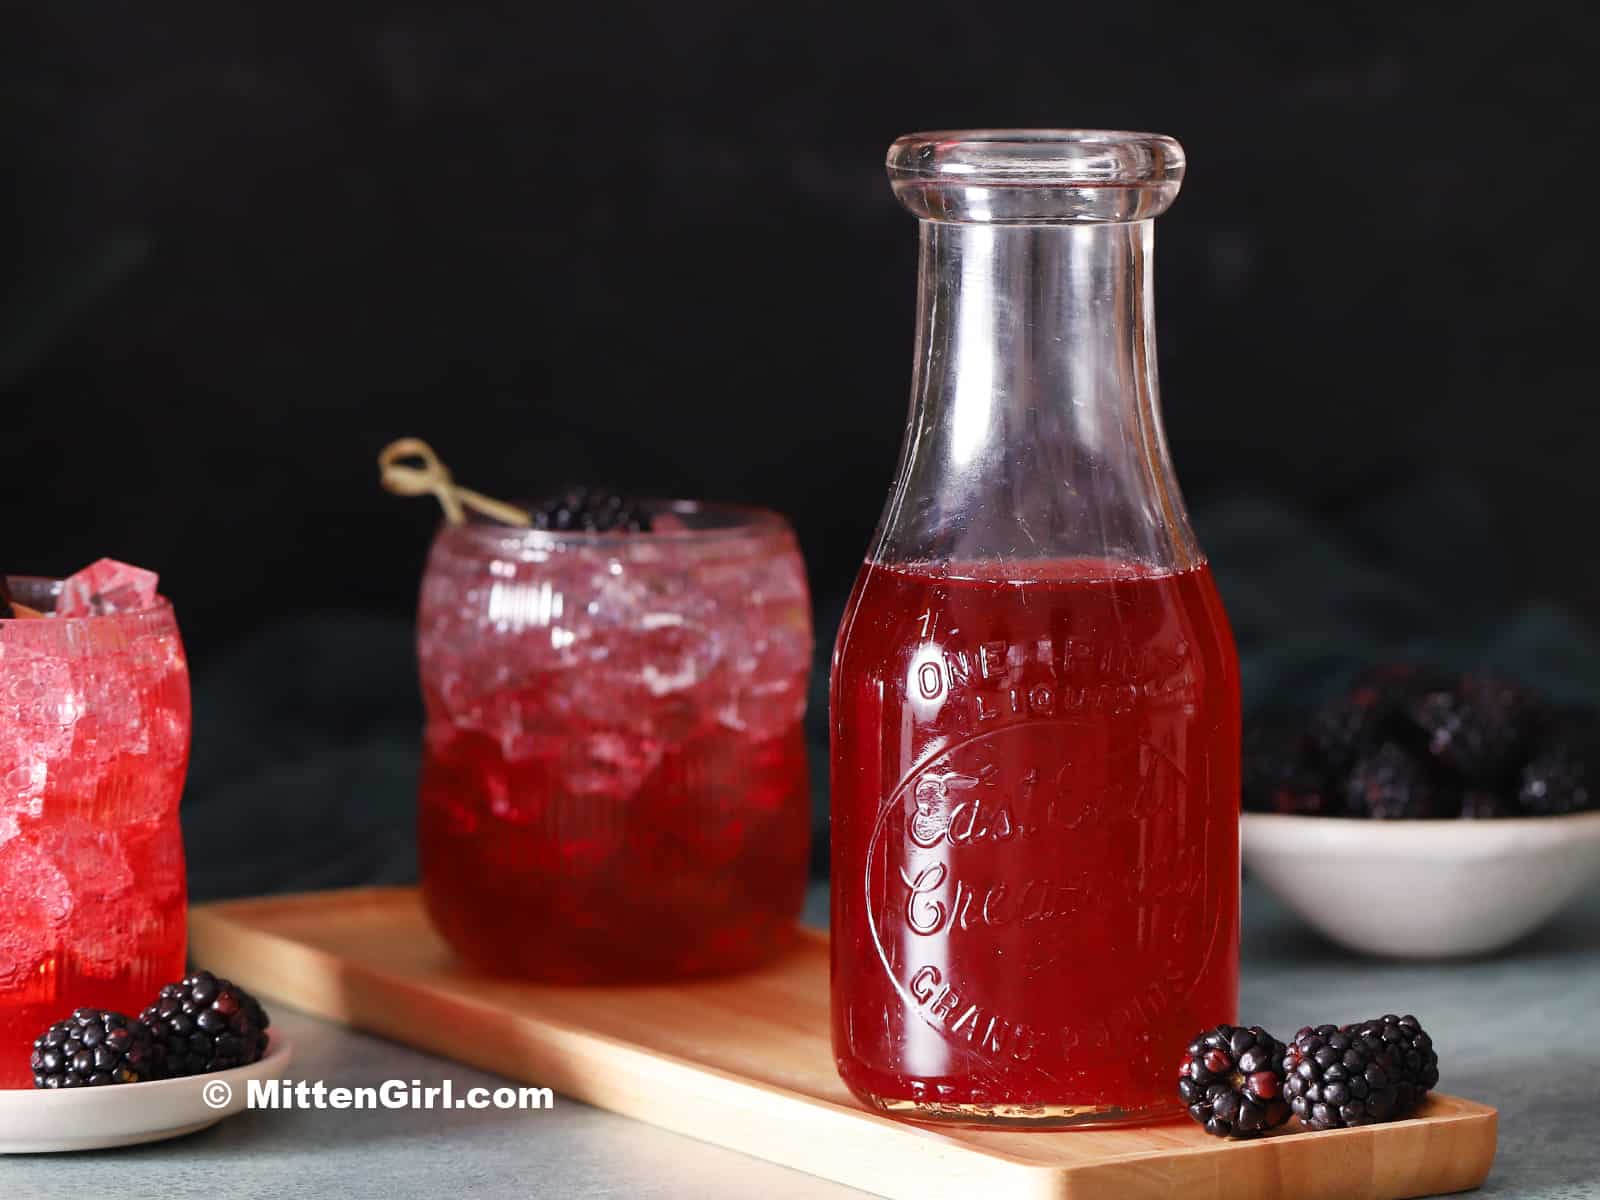 A glass bottle of blackberry syrup next to two glasses of blackberry Italian Sodas.